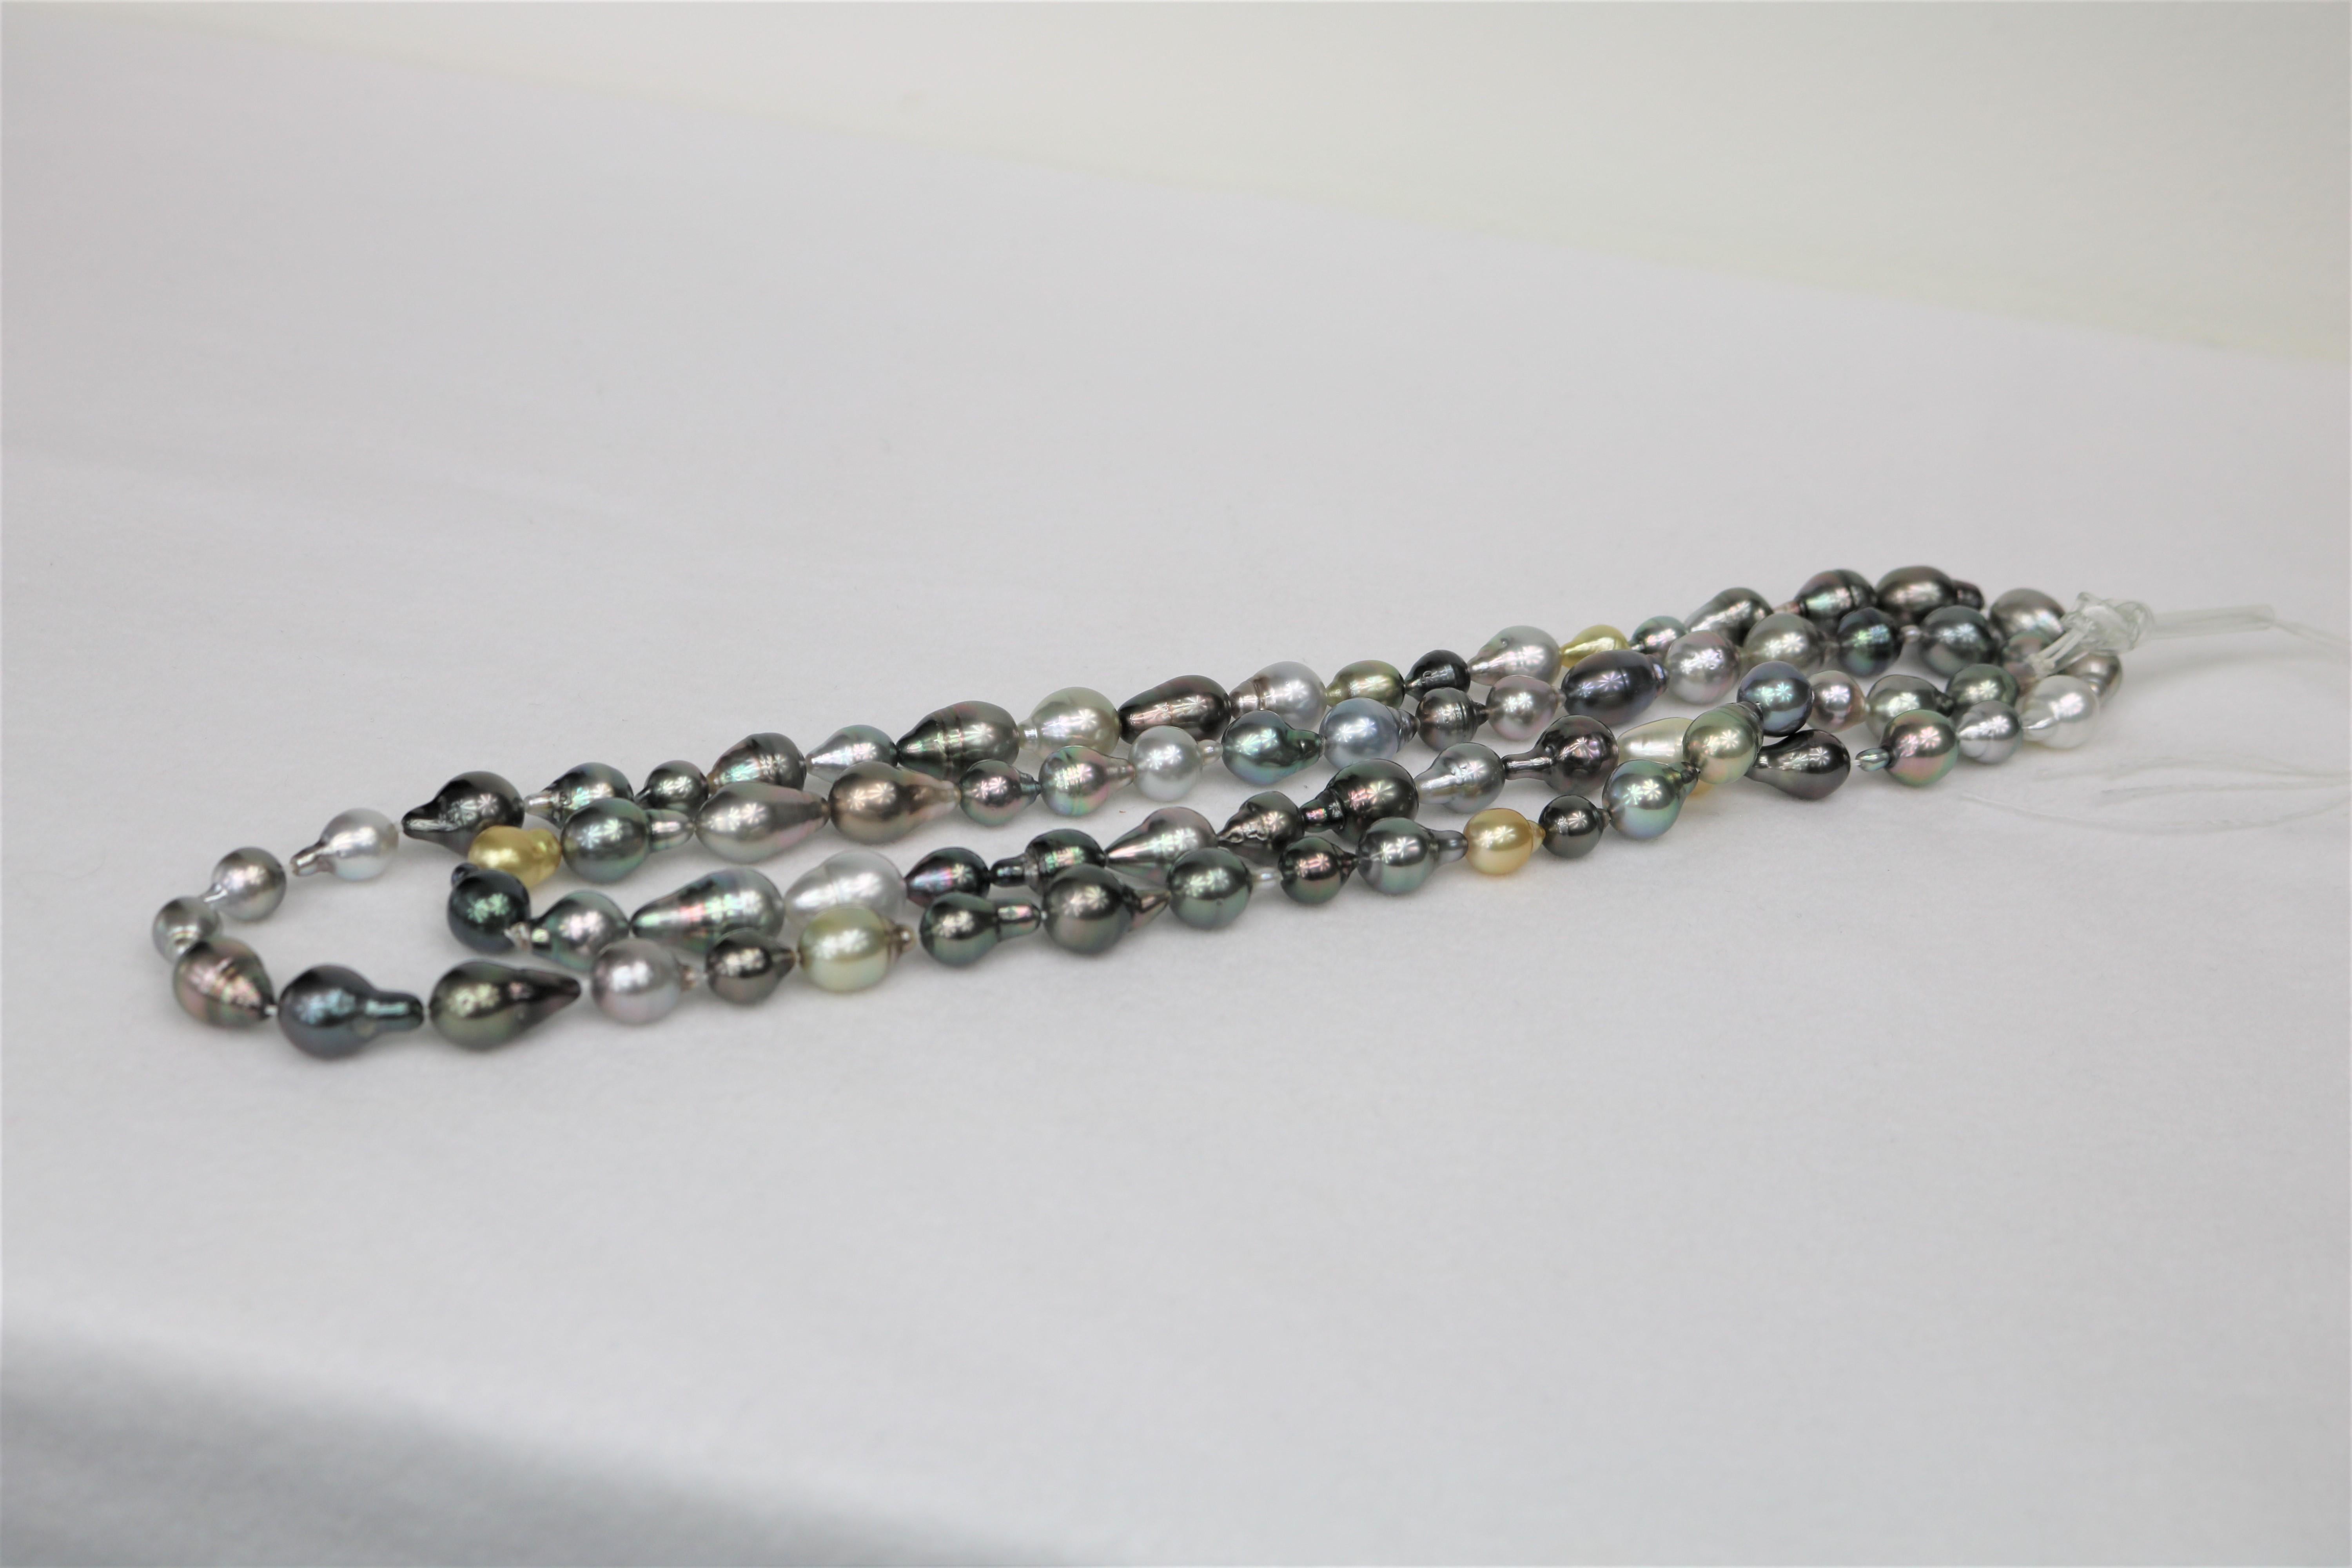 7-11mm Tahitian Multi Color Long Drop Necklace with Gold Clasp
AAA Luster, Long Drop Multi Color Tahitian Pearl Necklace, 36 inches hand knotted with gold fishhook clasp #CP33
